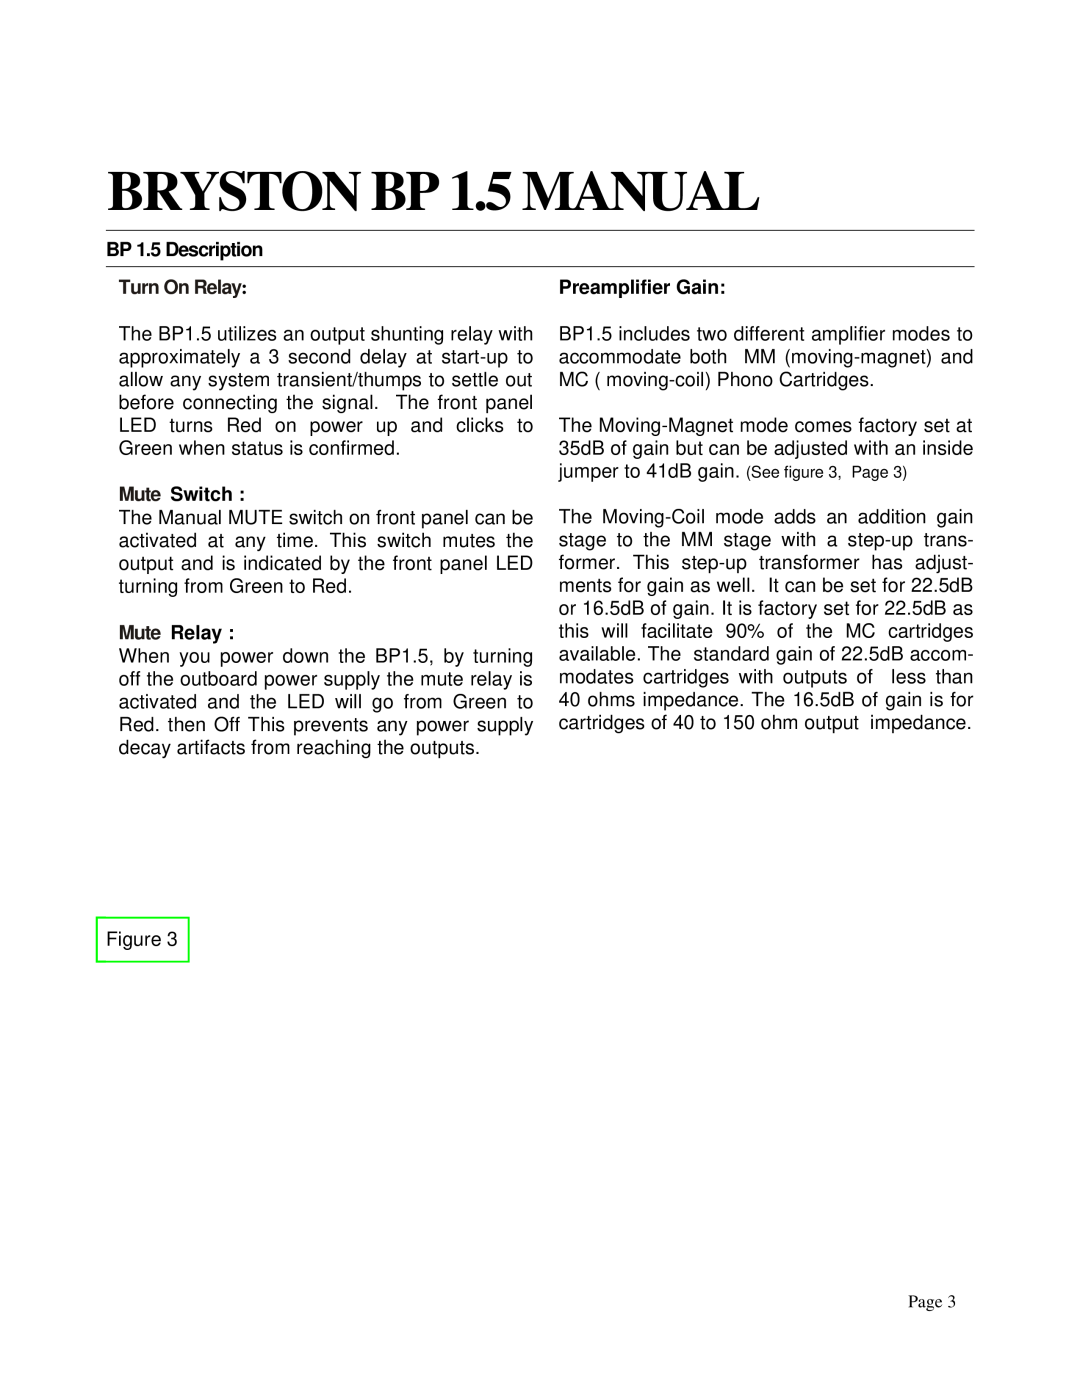 Bryston owner manual BRYSTON BP 1.5 MANUAL, BP 1.5 Description, Mute Switch, Mute Relay, Turn On Relay 